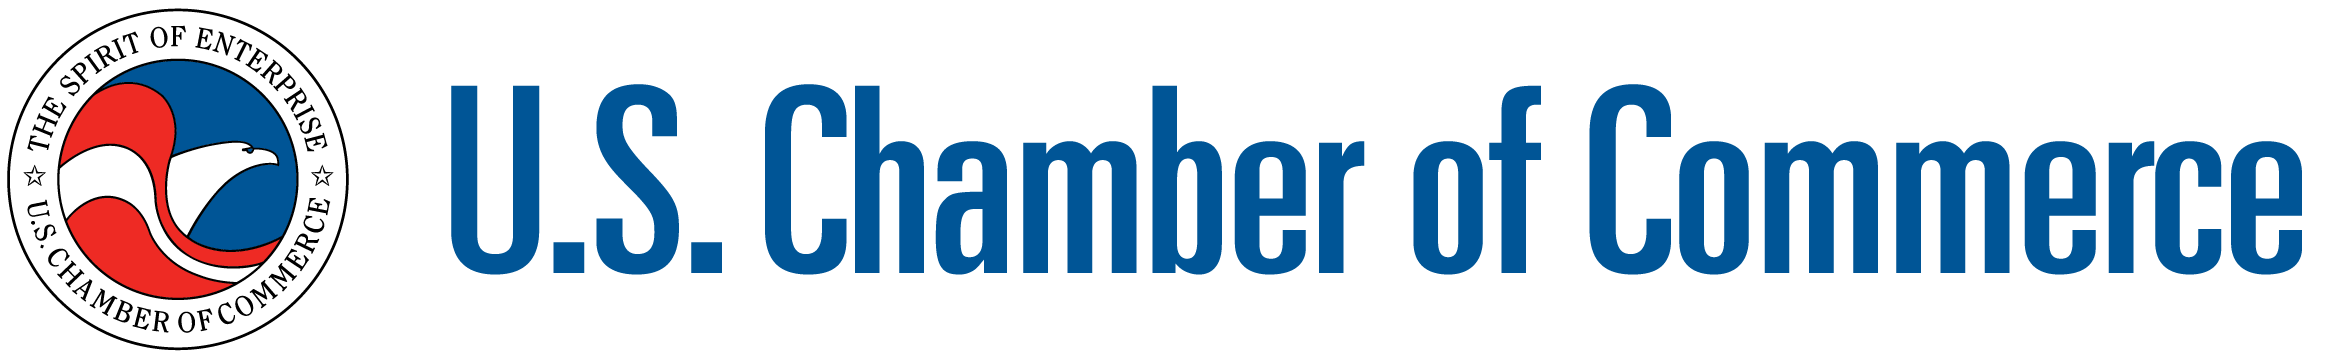 US Chamber of Commerce.png